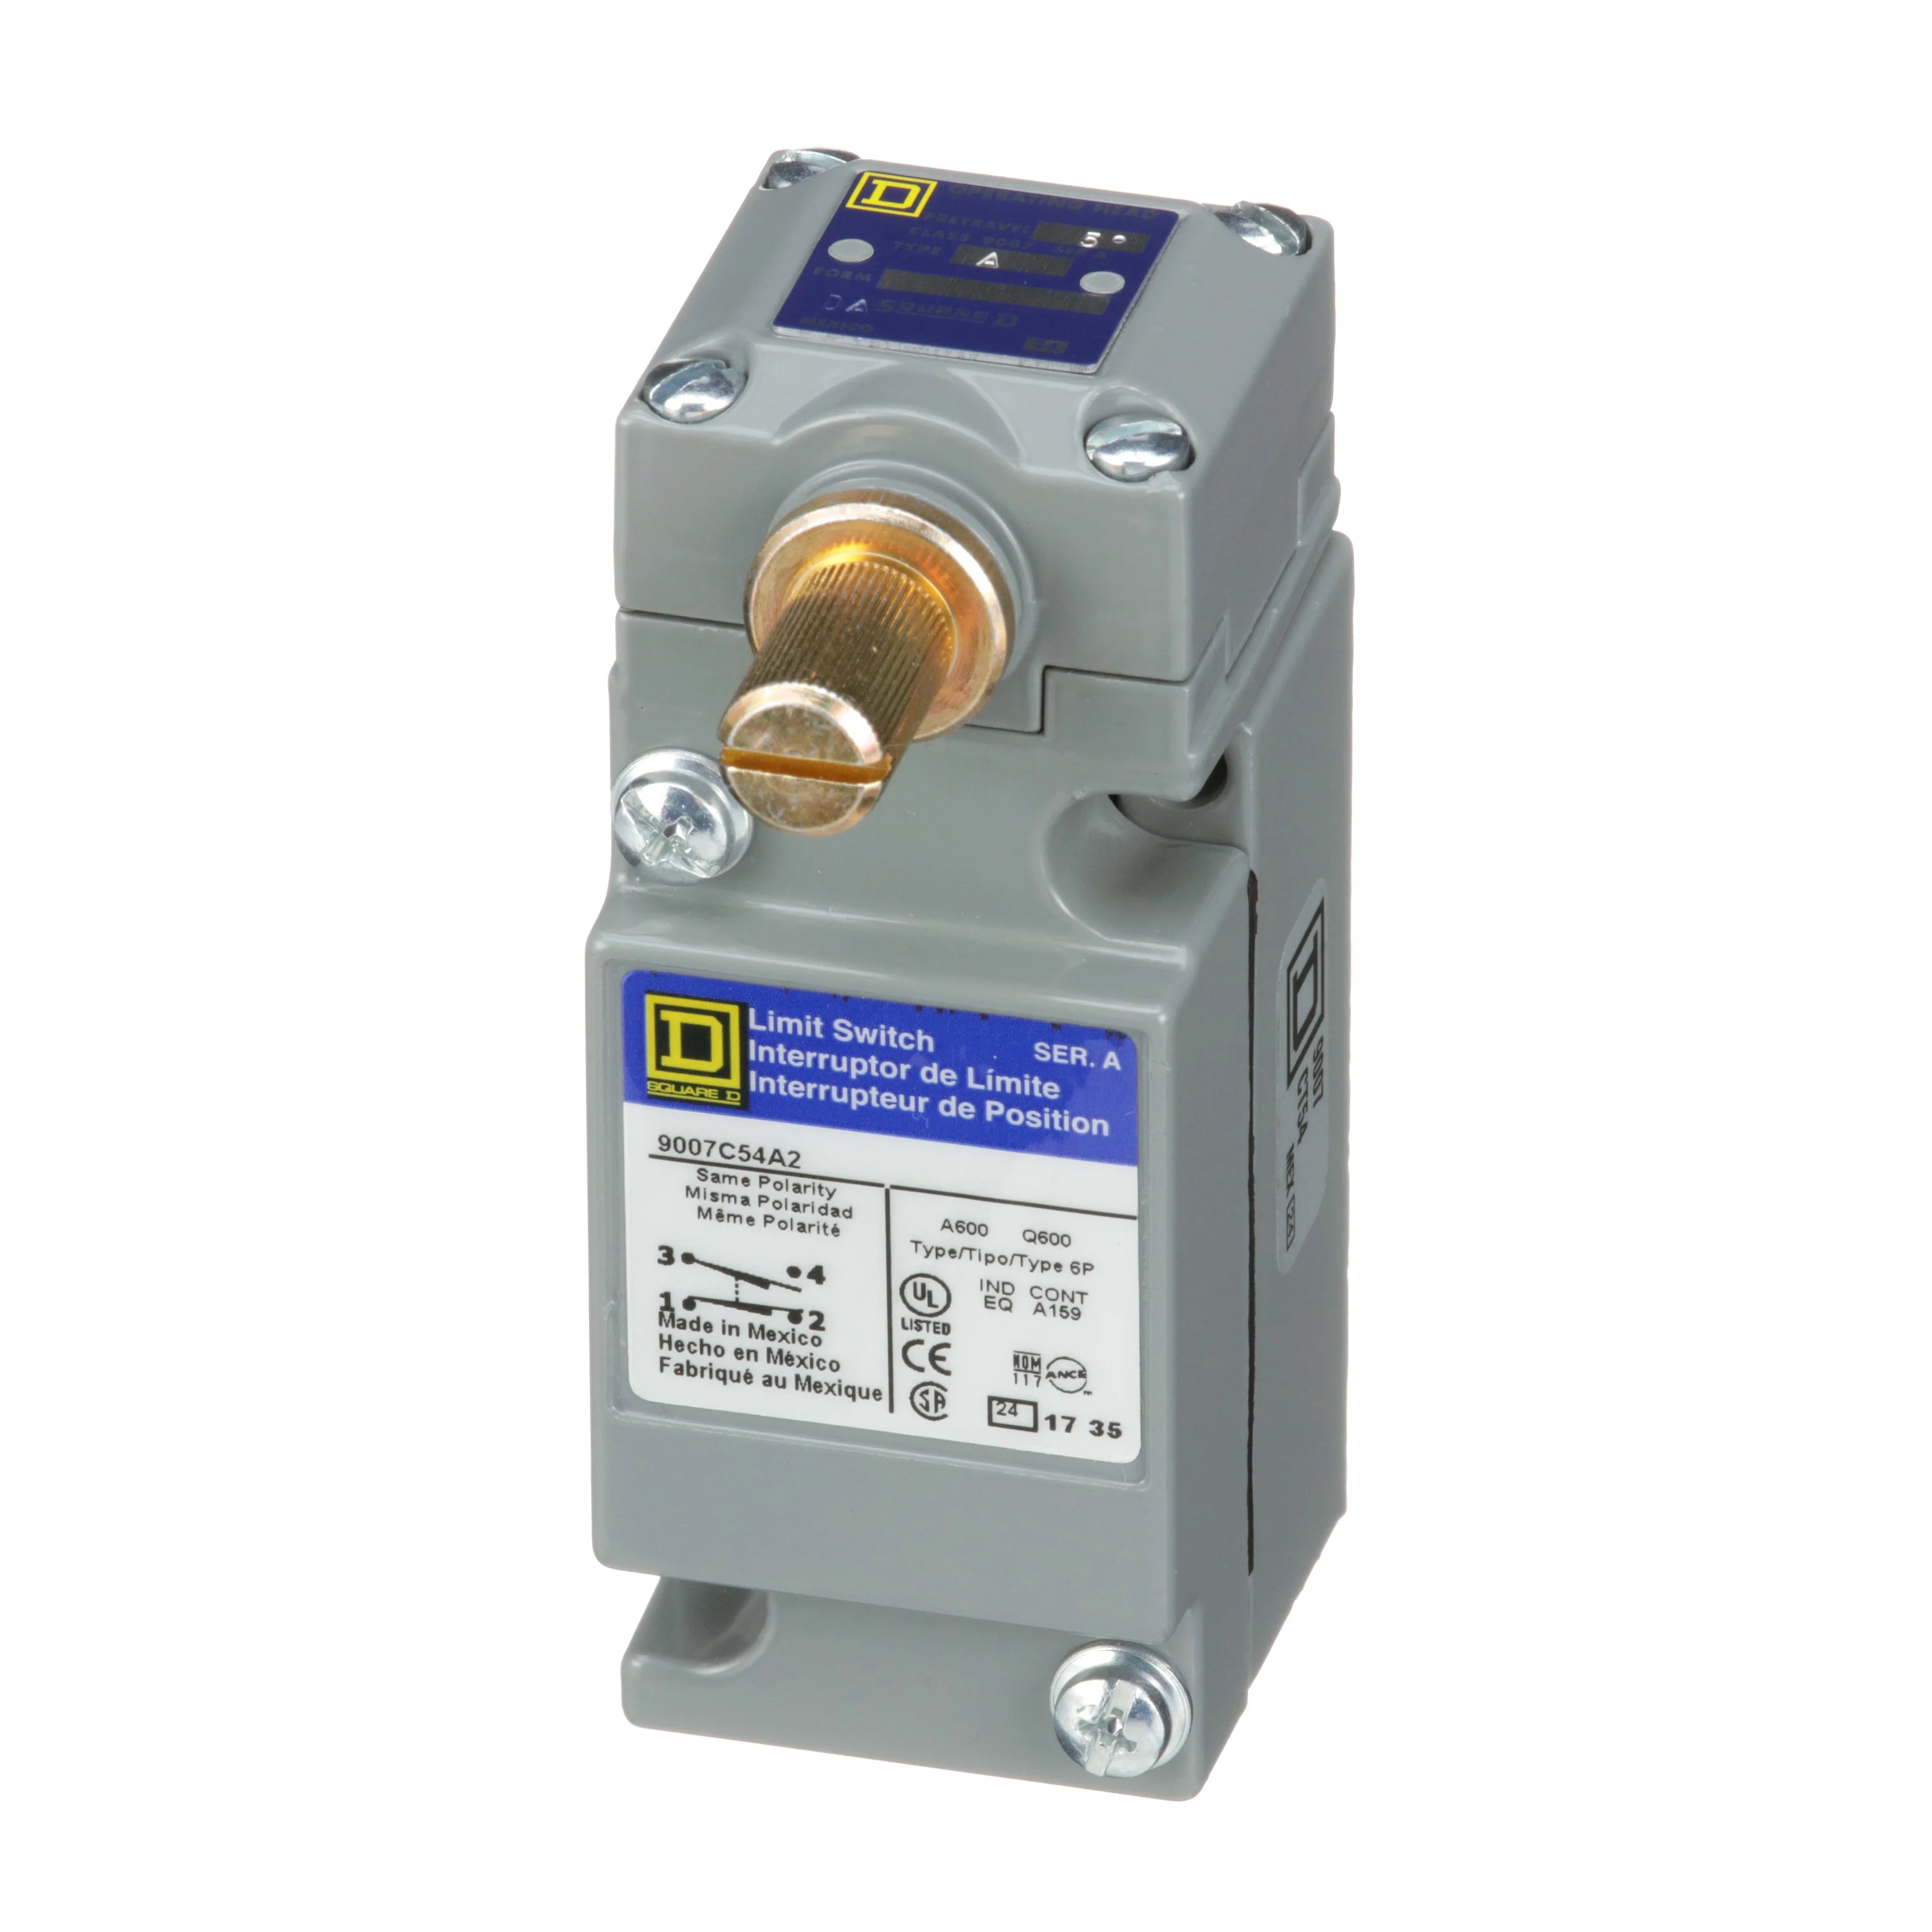 9007C54A2 | Schneider Electric Limit Switch, Heavy Duty, Rotary Lever CW/CCW, Snap Action 1NO-1NC, 10A, 600V